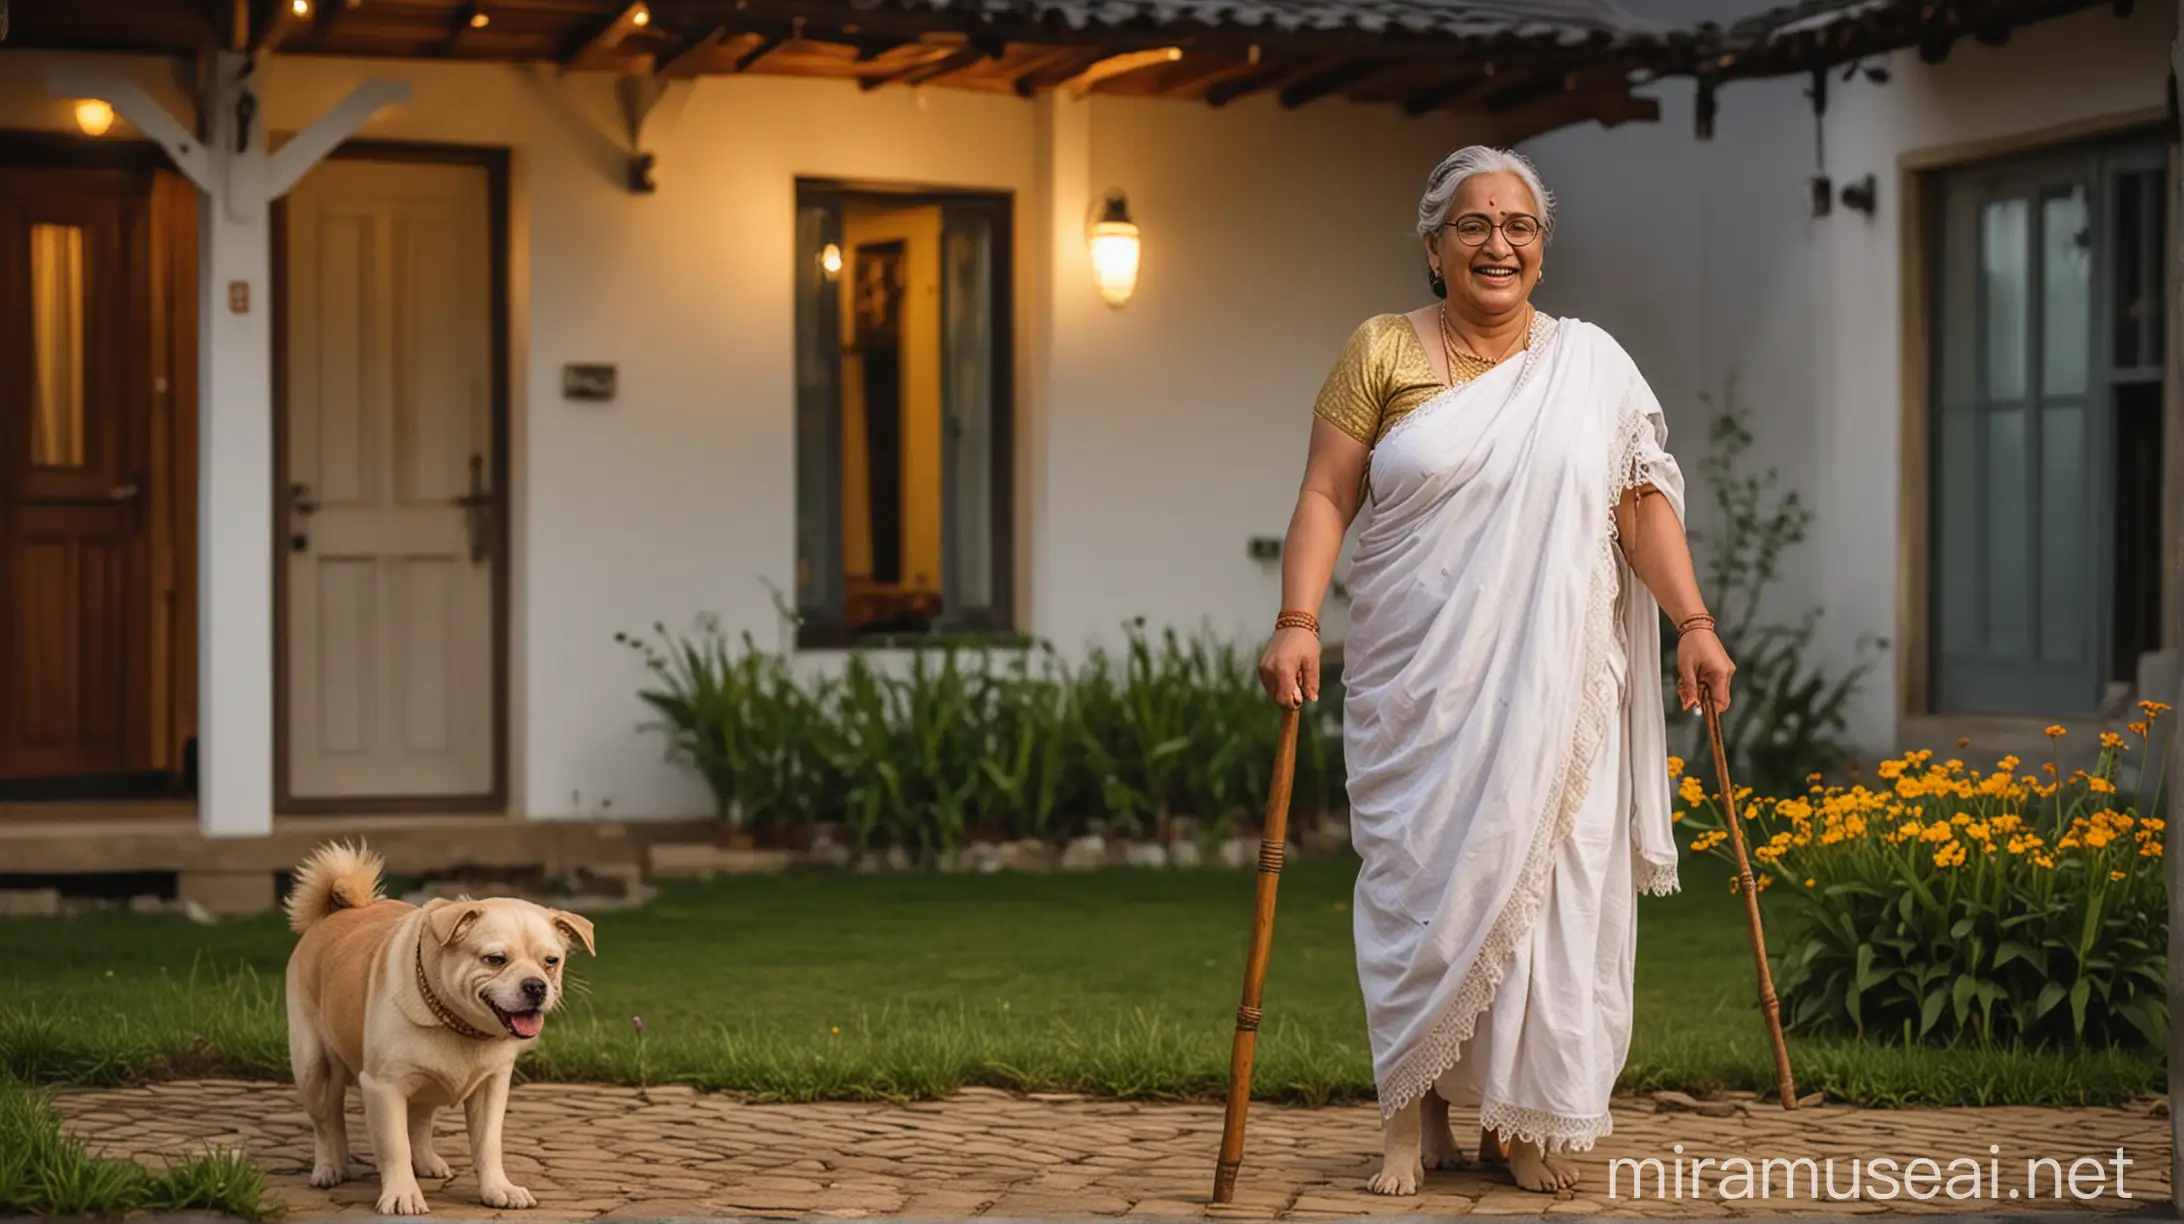 
sweet faced old desi  very curvy  fat   woman  with tick hair binding on head walking with a   wooden walking stick wearing   only a white towel  on her body  and a golden neck lace and a spectacles. she is happy and laughing . she is  standing with her dog  . its night  time and in background there is a luxurious farm house  with bulb light and luxurious house   with flowers and grass and concrete floor and it is rainy season . she is wearing golden sleepers on feet.
